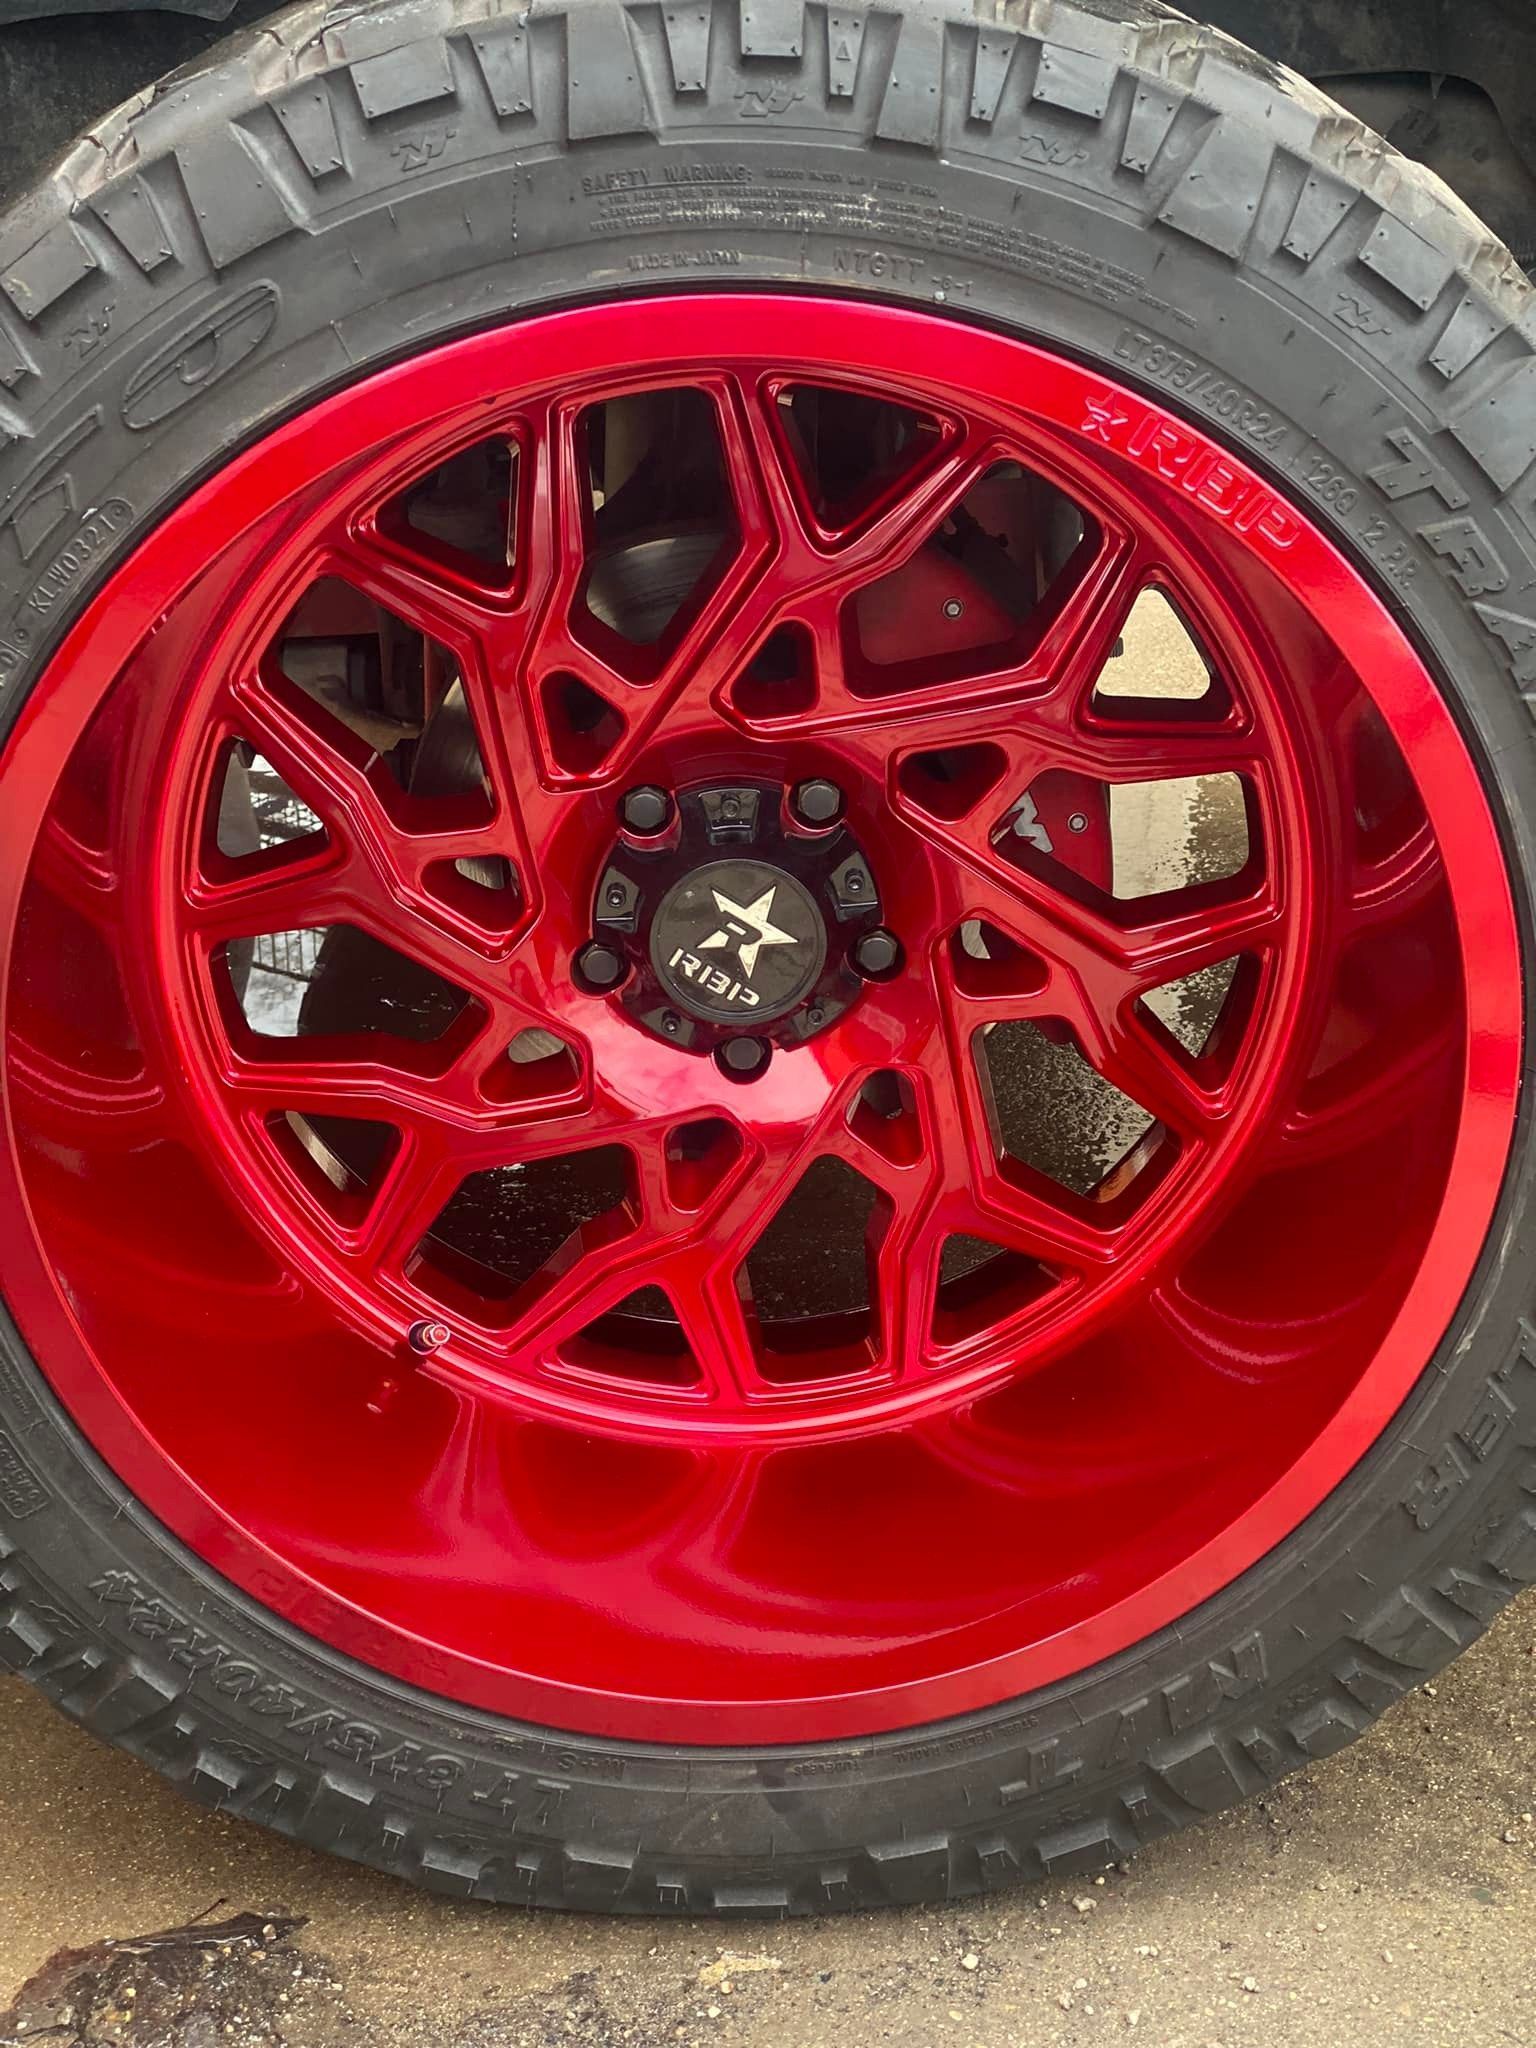 a close-up of a red wheel and tire on a car.